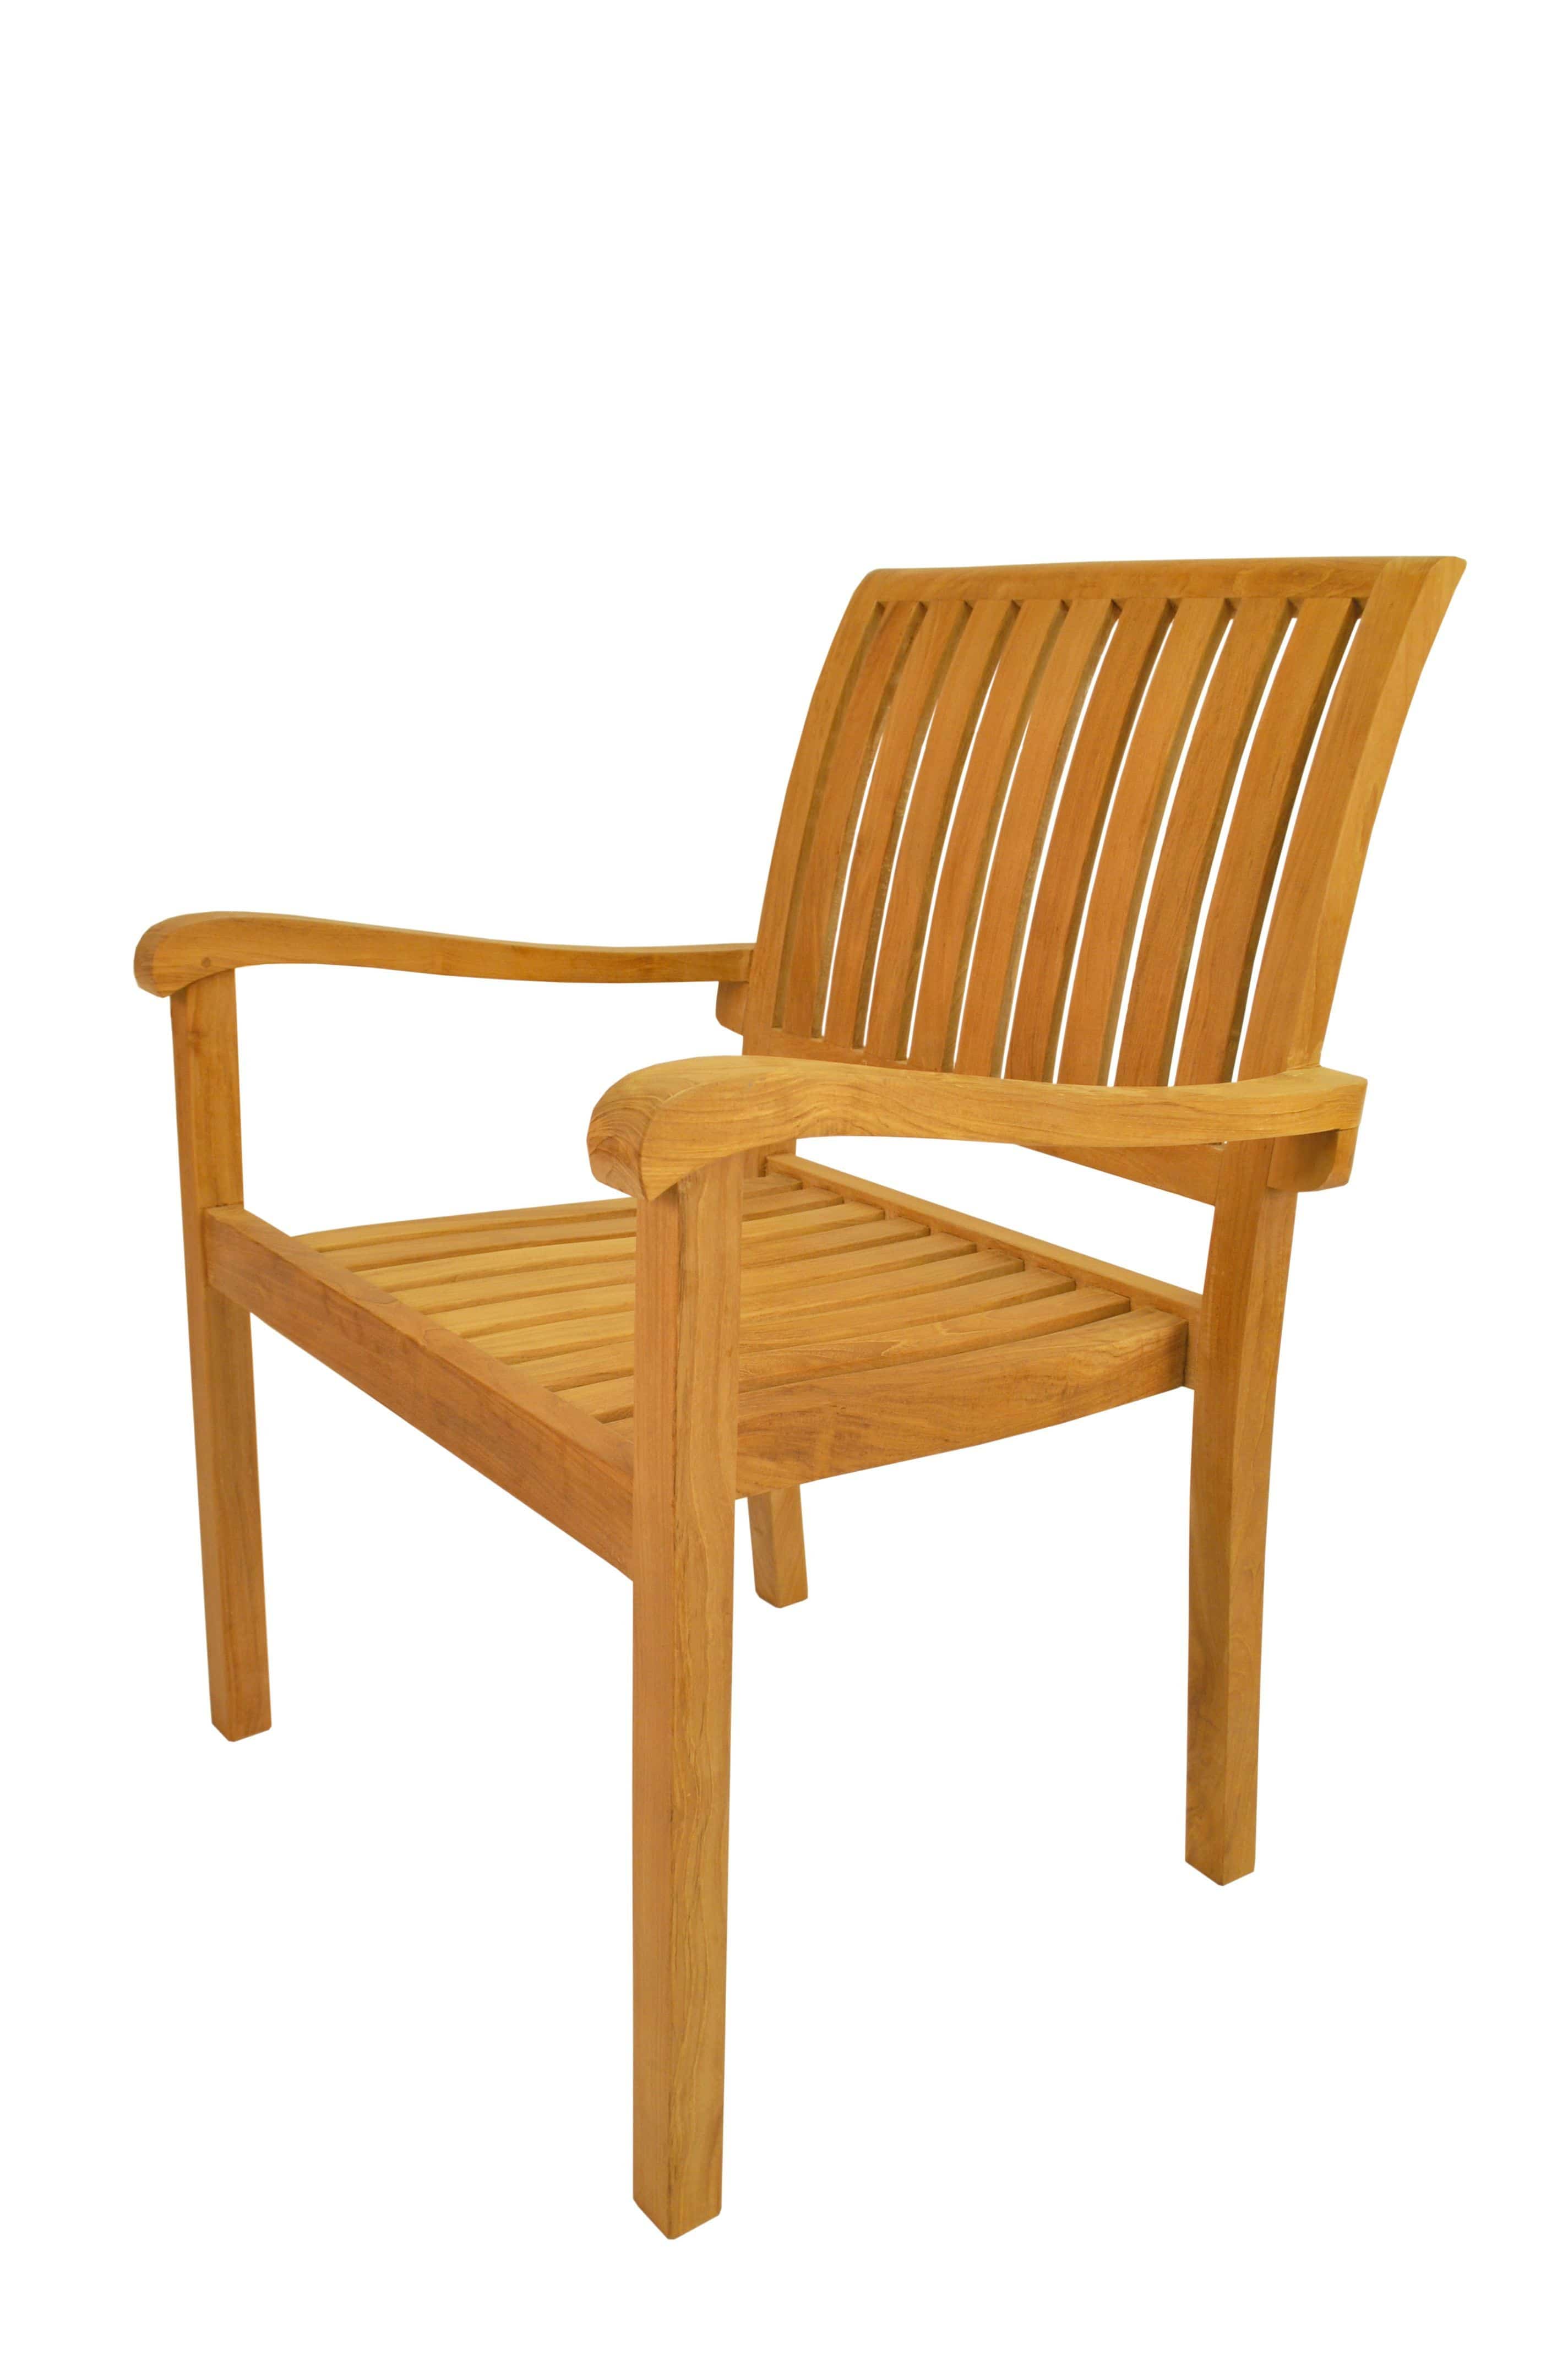 Anderson Teak Outdoor Dining Chairs Anderson Teak Aspen Stackable Armchair (Fully Built & 4 pcs in a box)